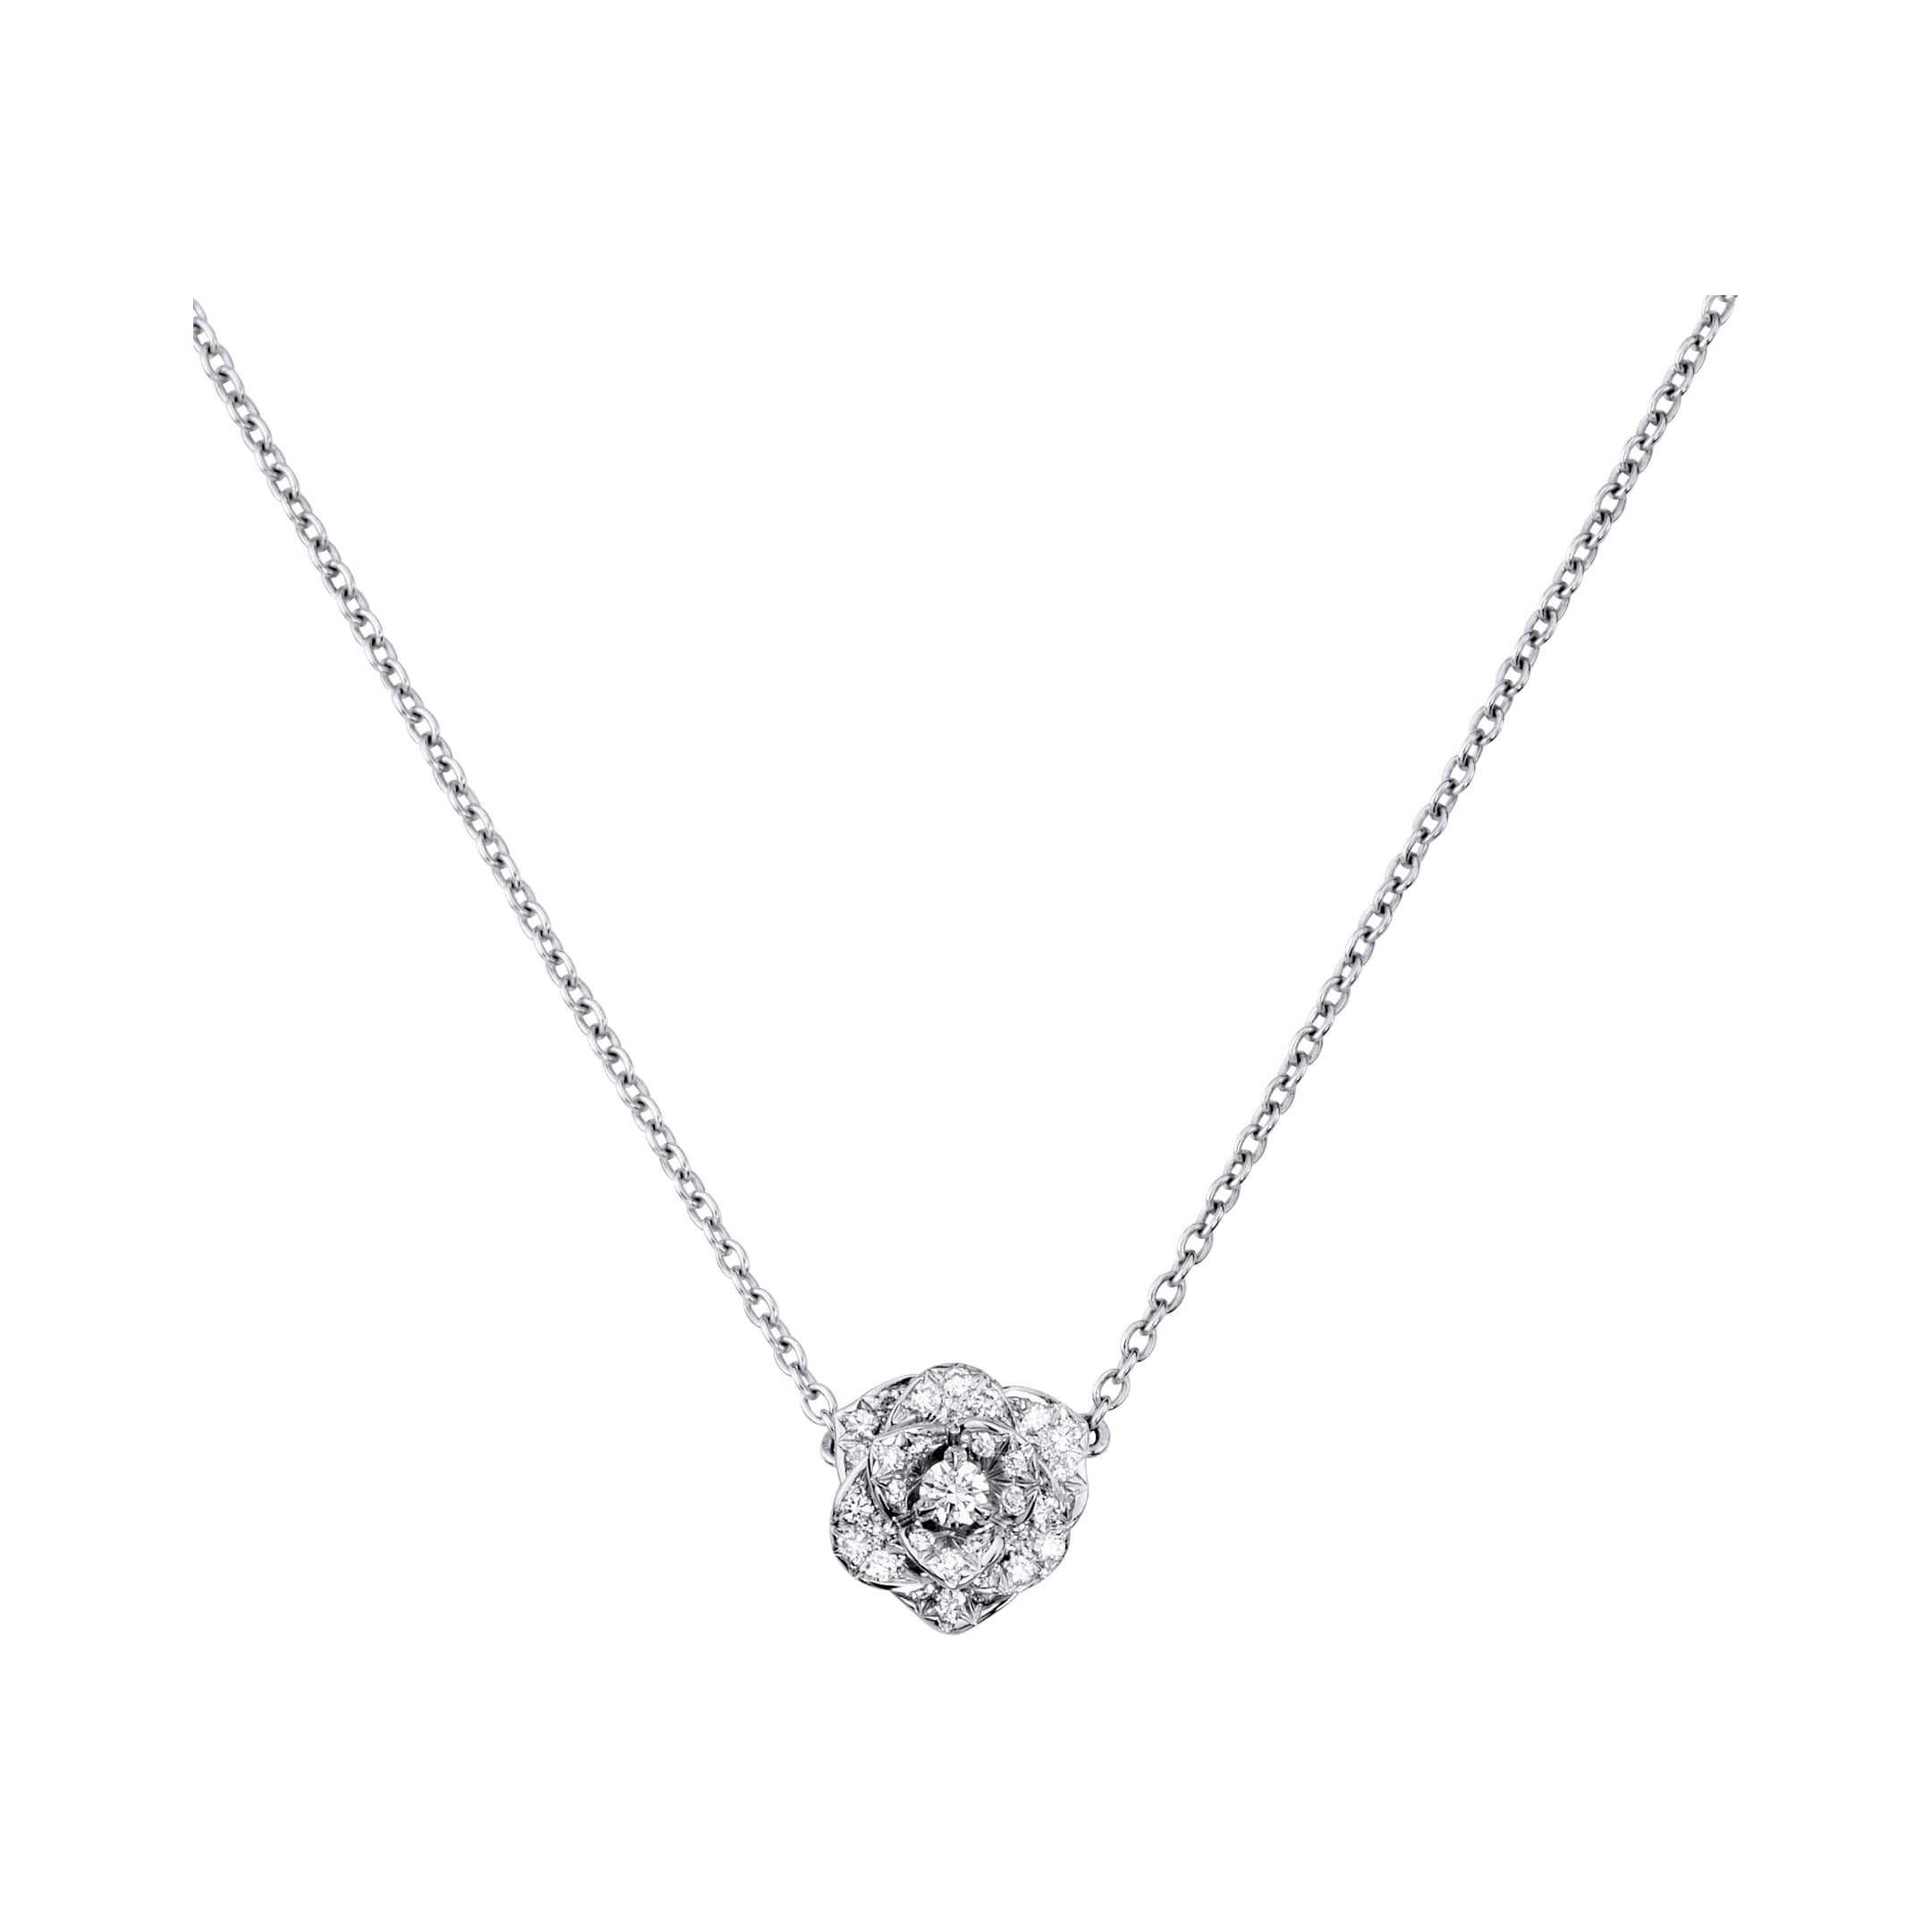 Piaget Possession Collection Diamond Rose Gold Pendant Necklace